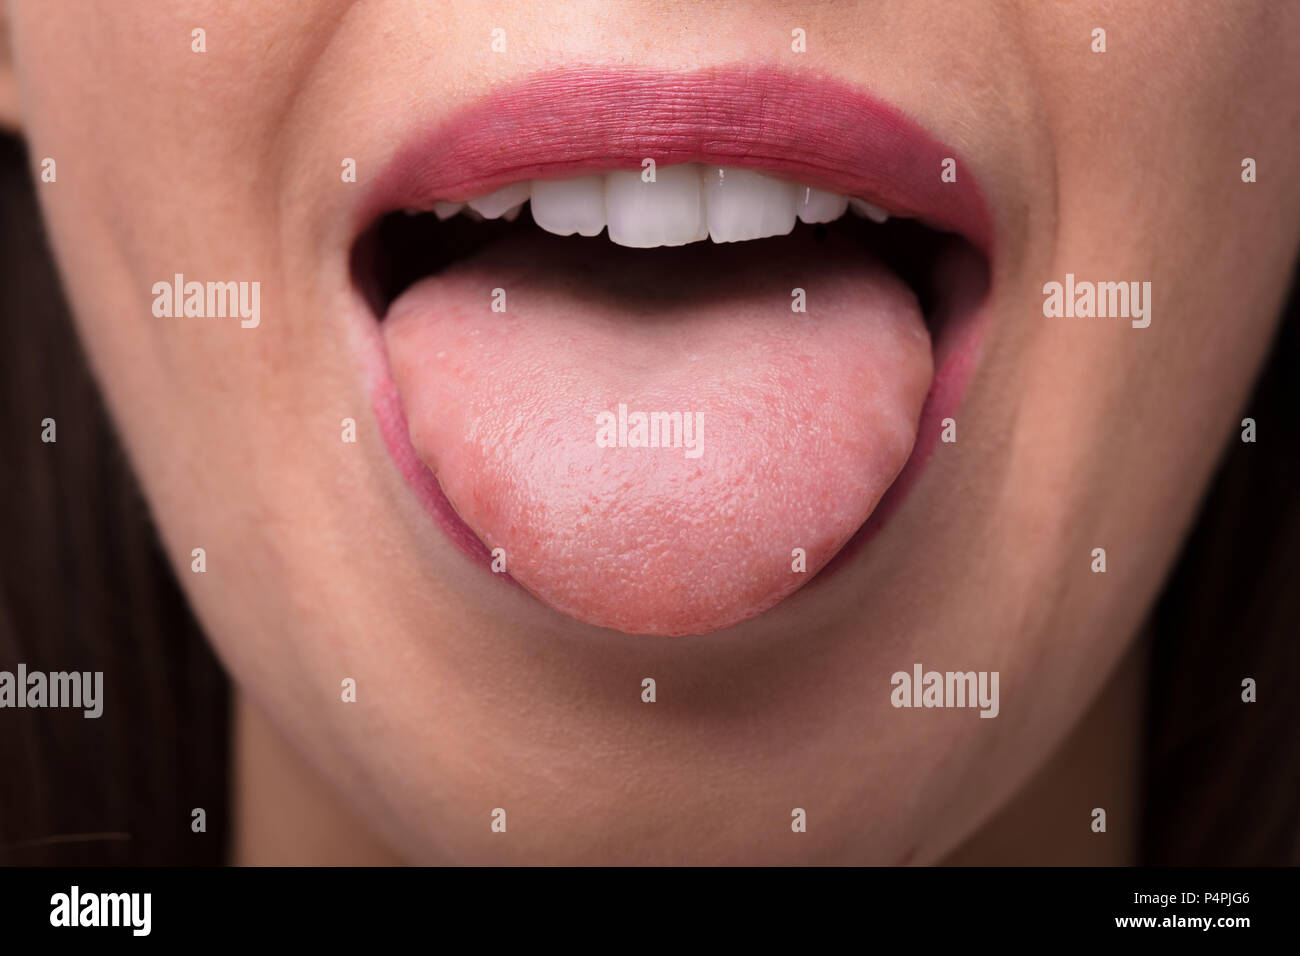 Close-up Photo Of A Woman Showing Tongue Stock Photo